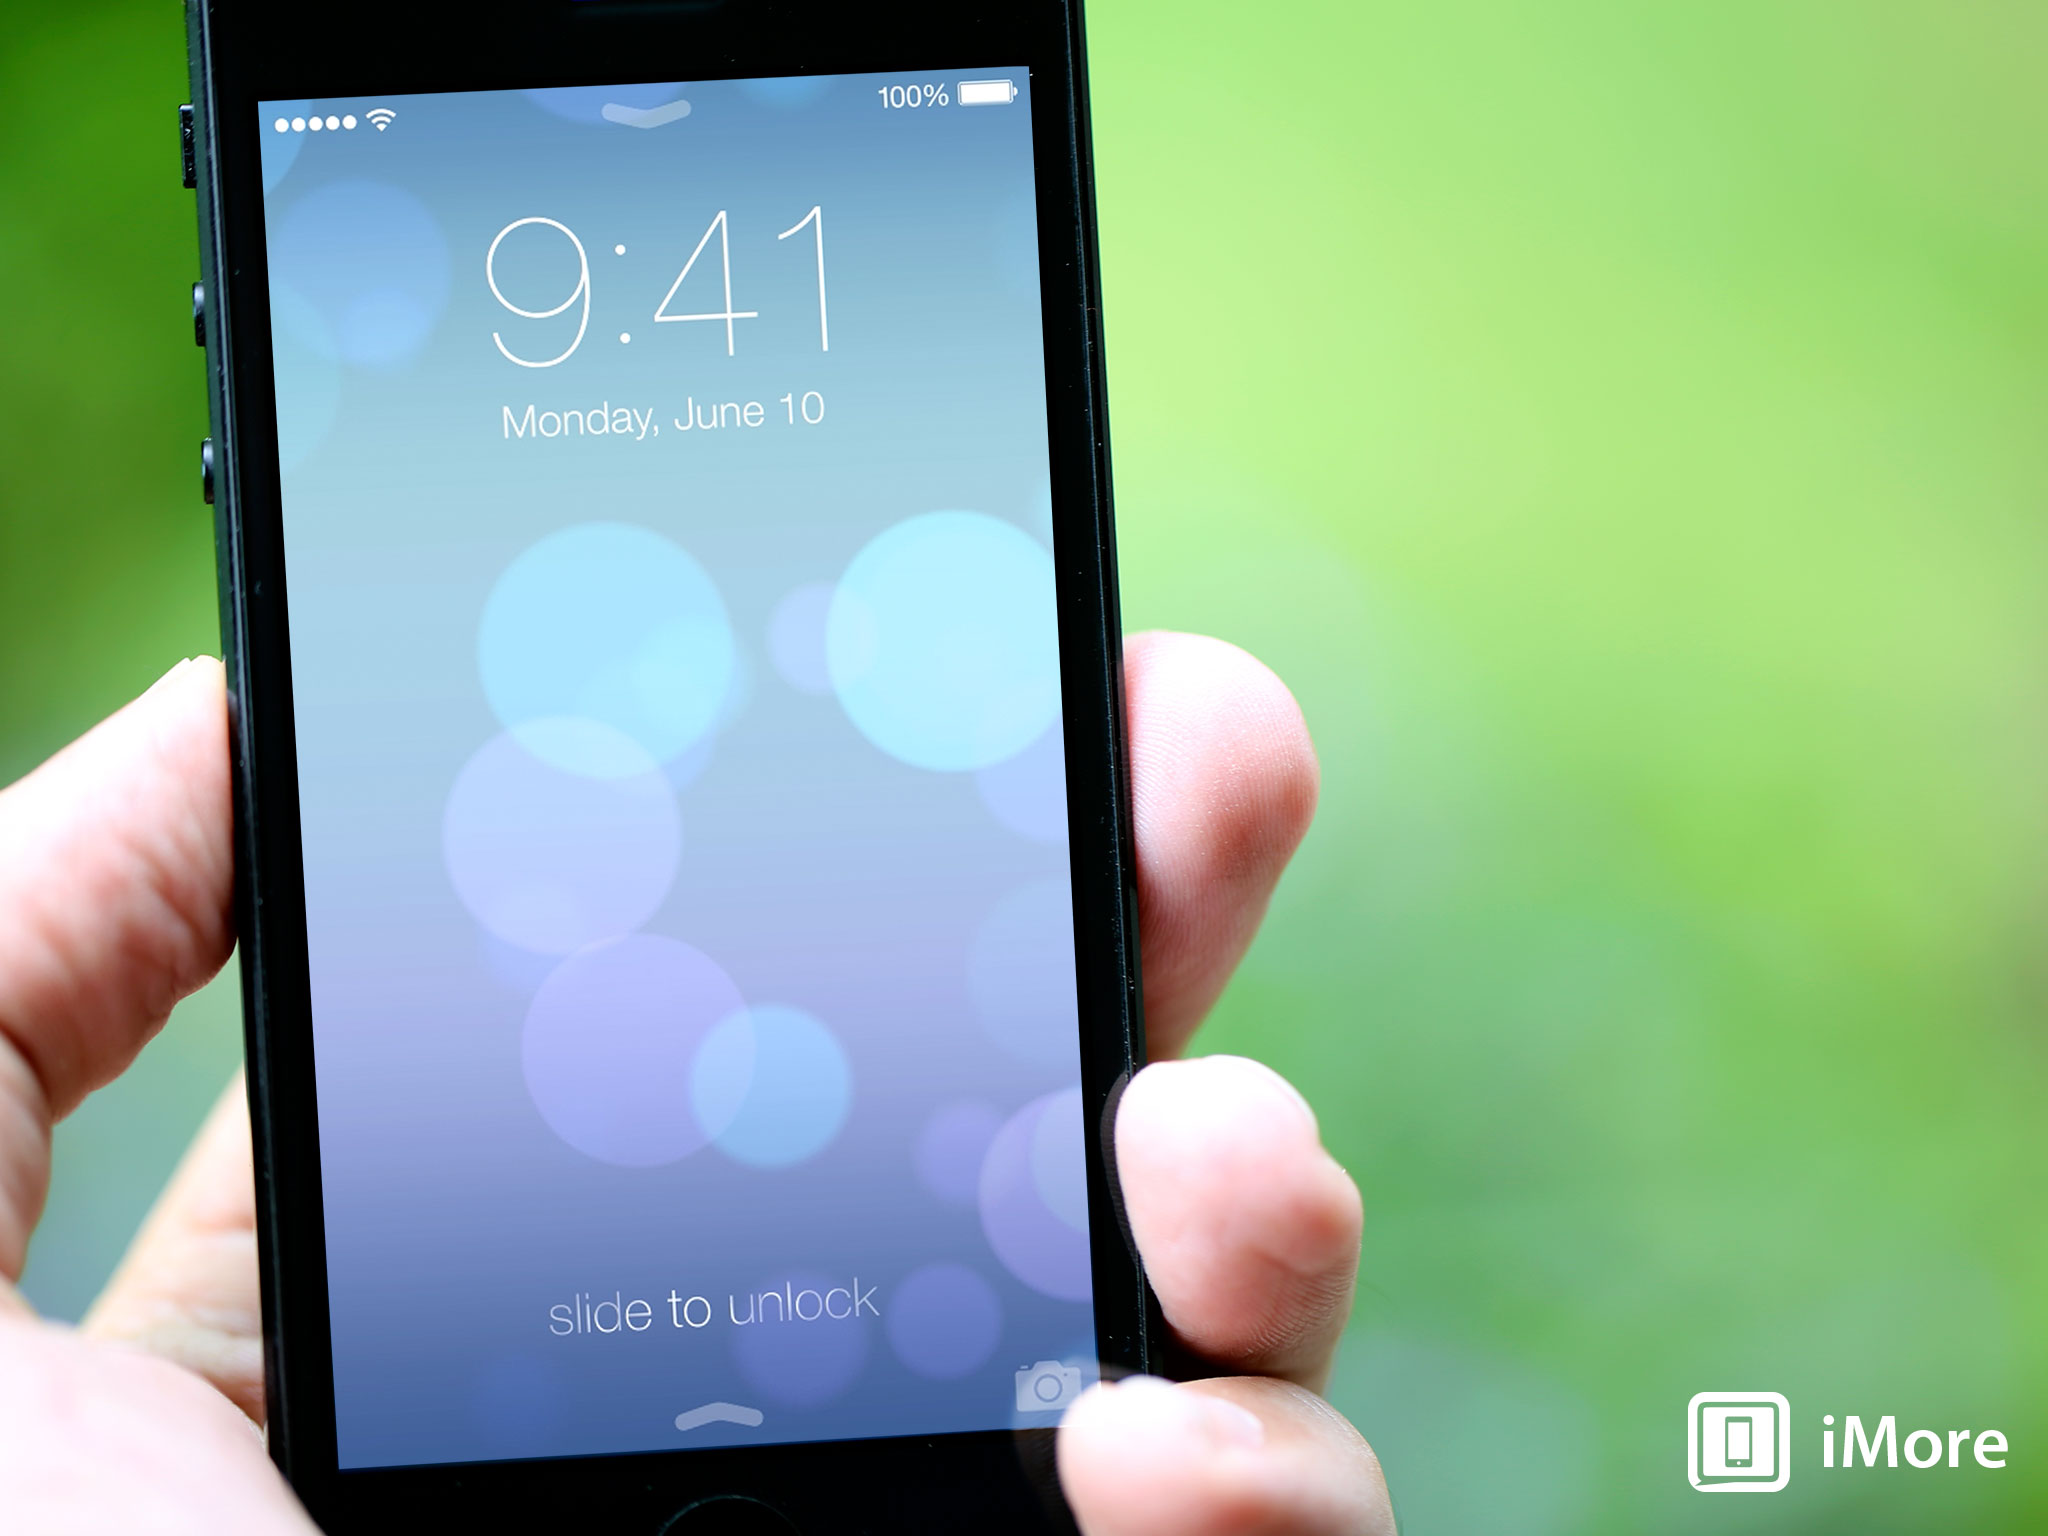 How to fix activation errors on iPhone after an installation of iOS 7 beta